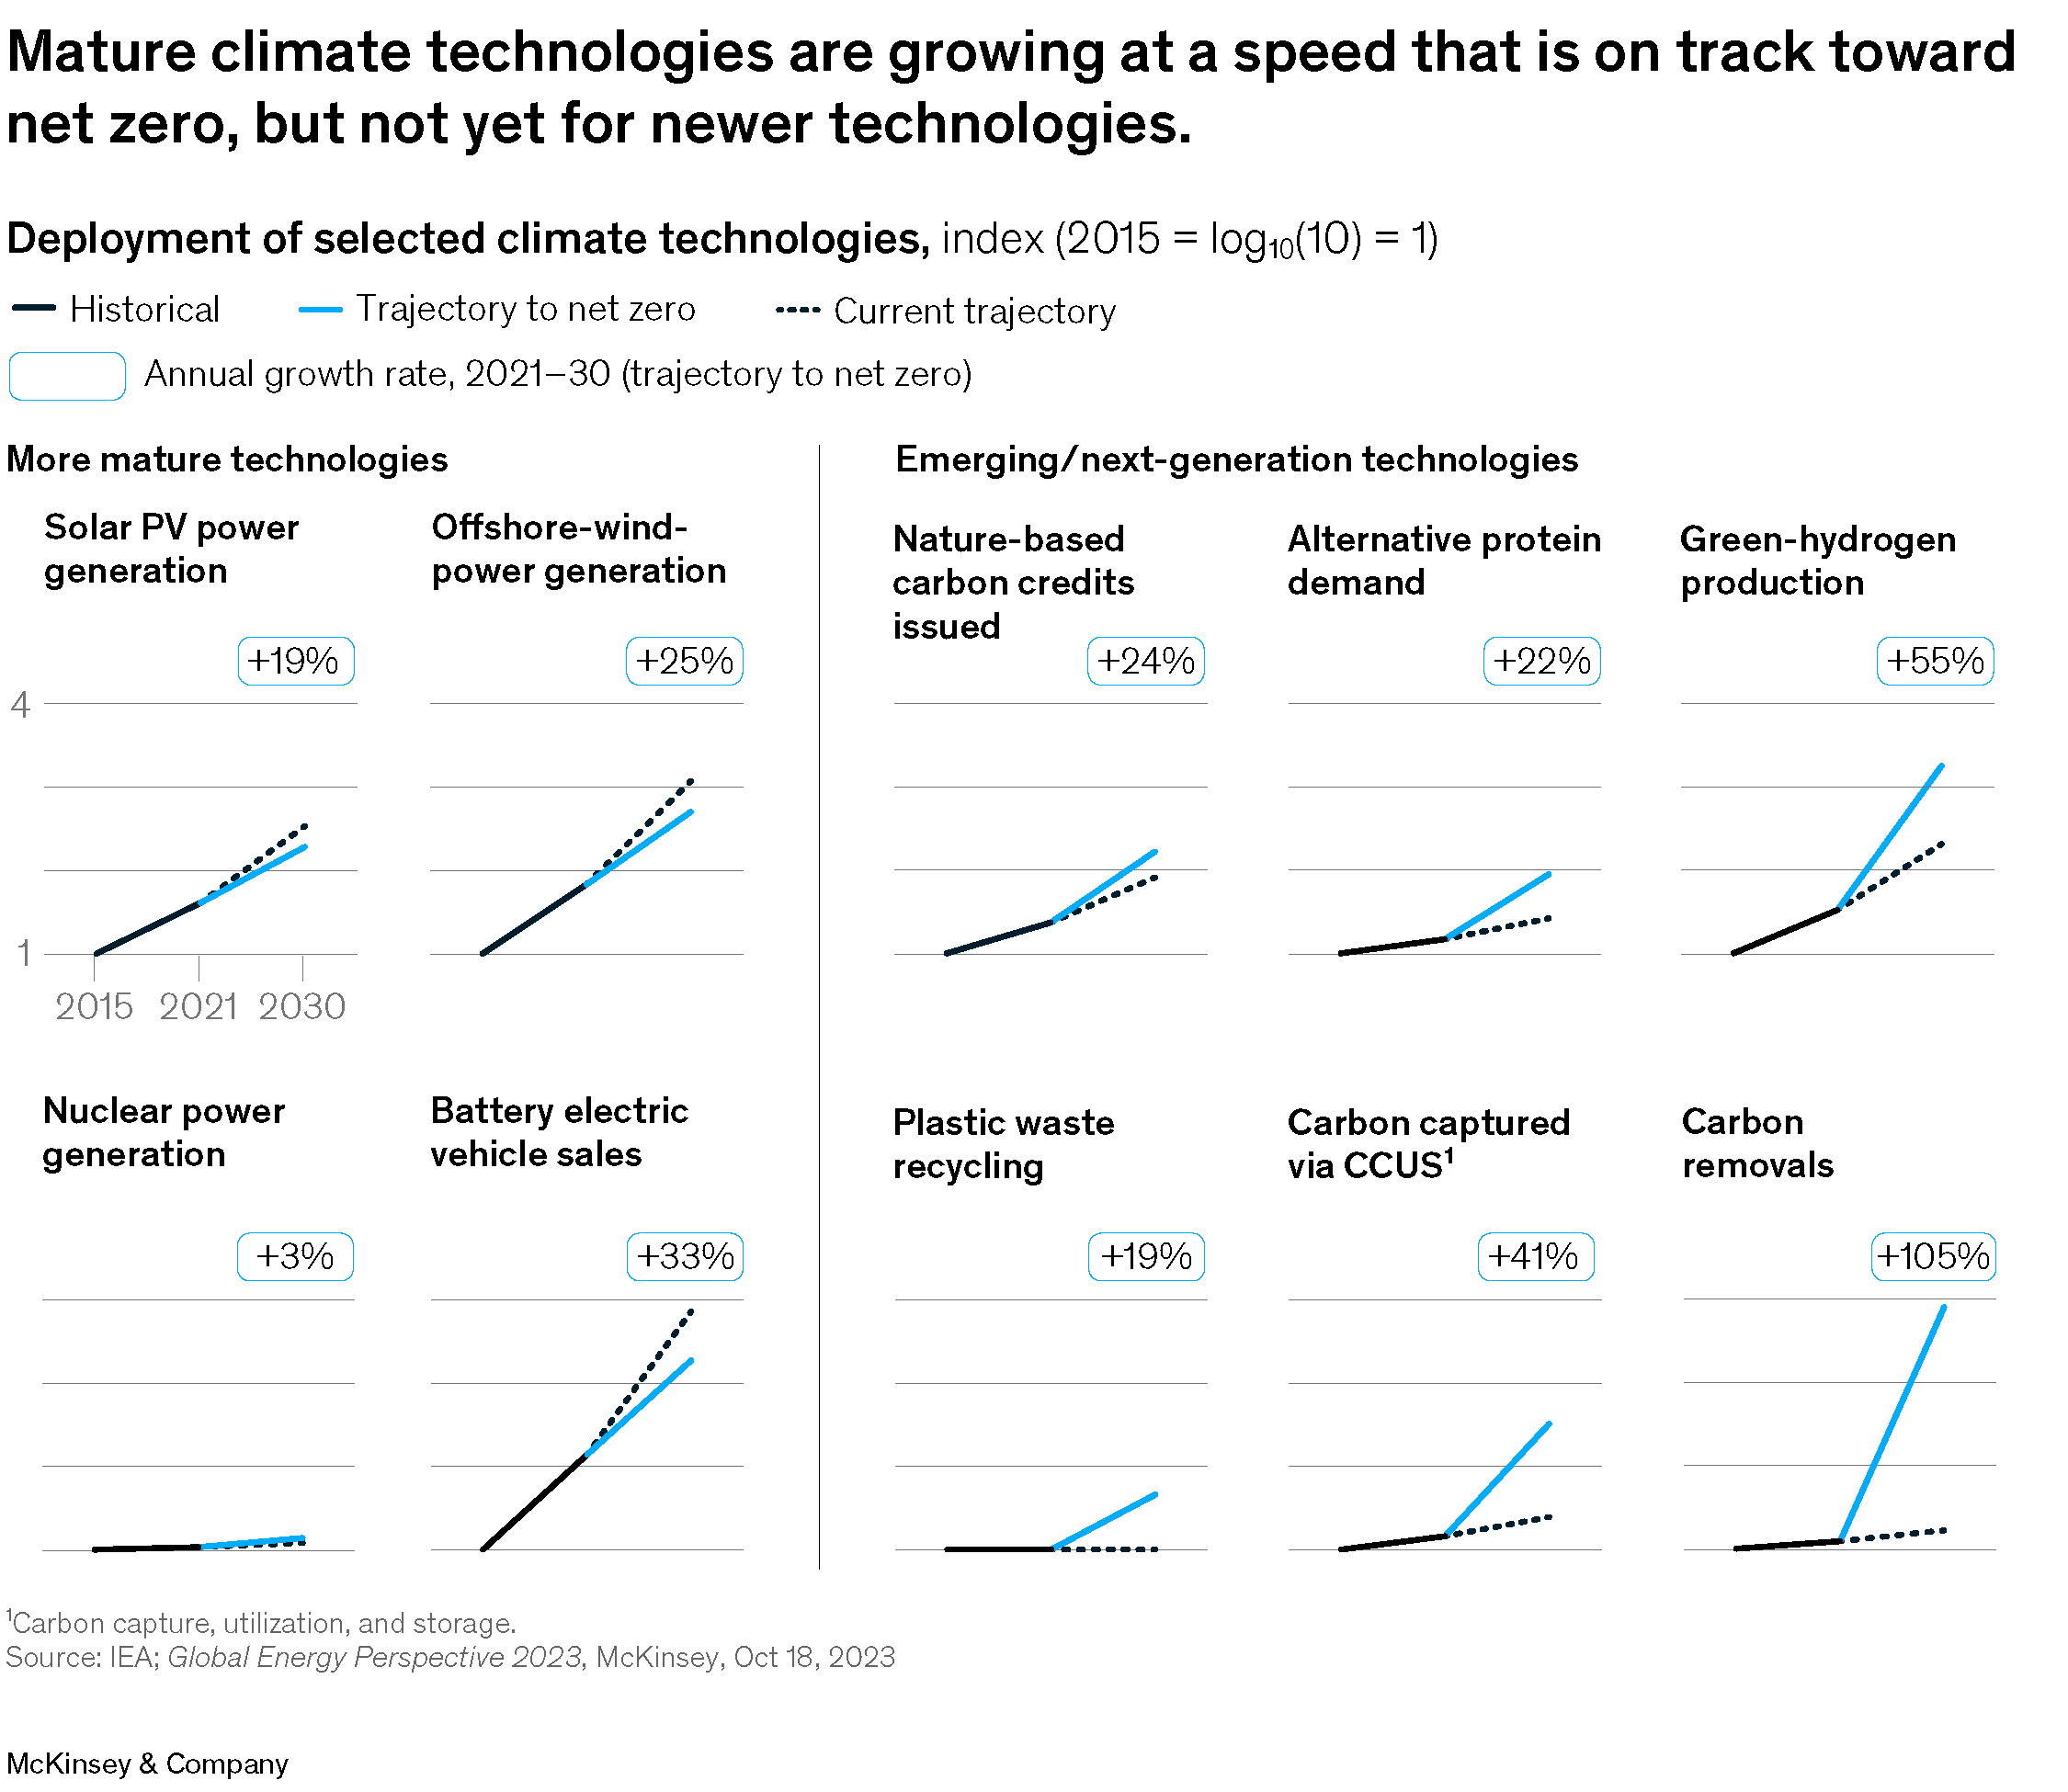 A chart titled, "Mature climate technologies are growing at a speed that is on a track toward net zero, but not yet for newer technologies".